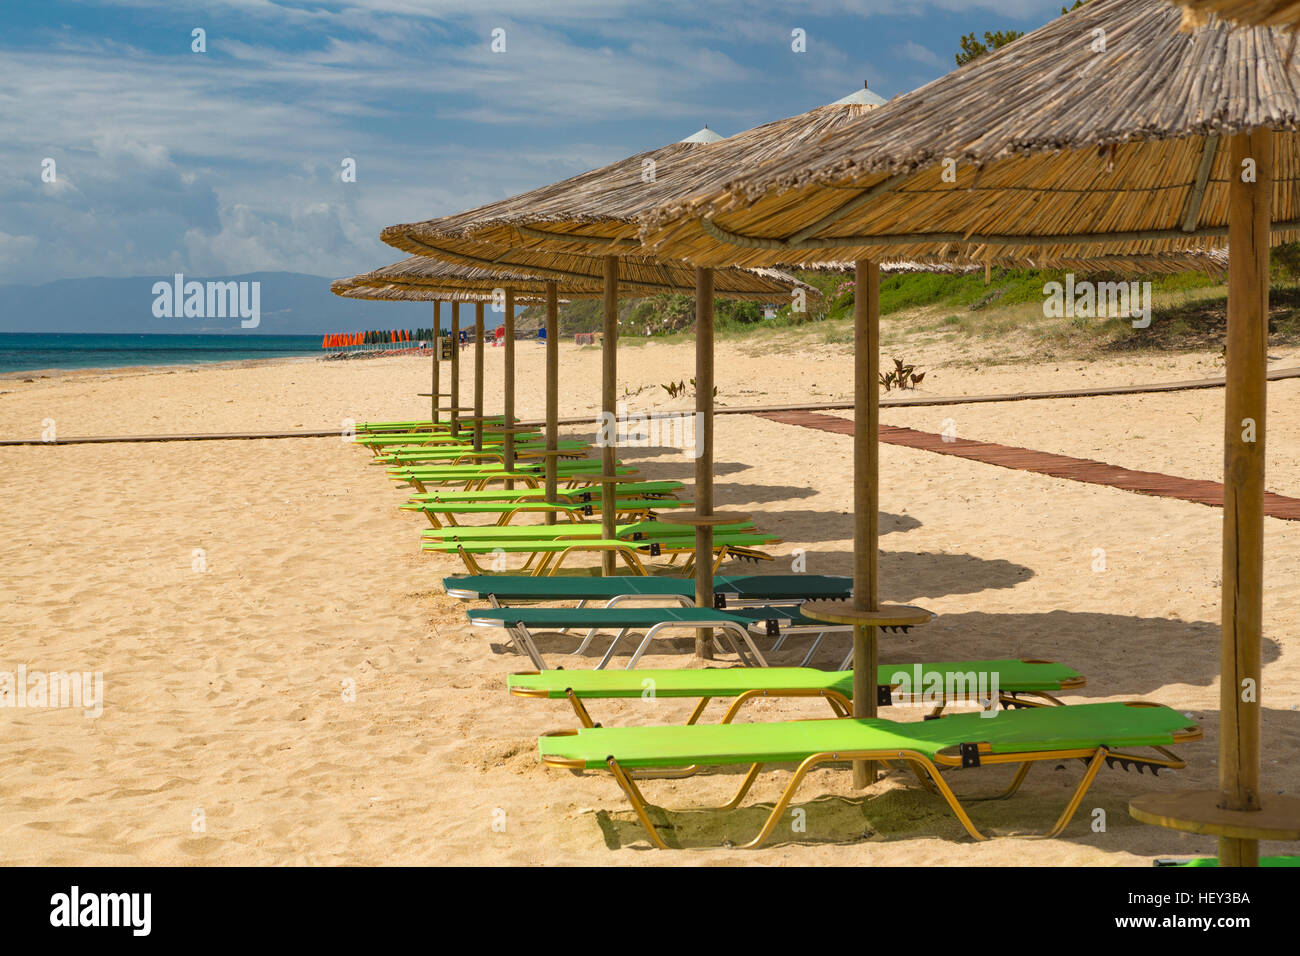 Sun loungers and parasols in a row on the sand at Skala Beach, Kefalonia, Greece Stock Photo